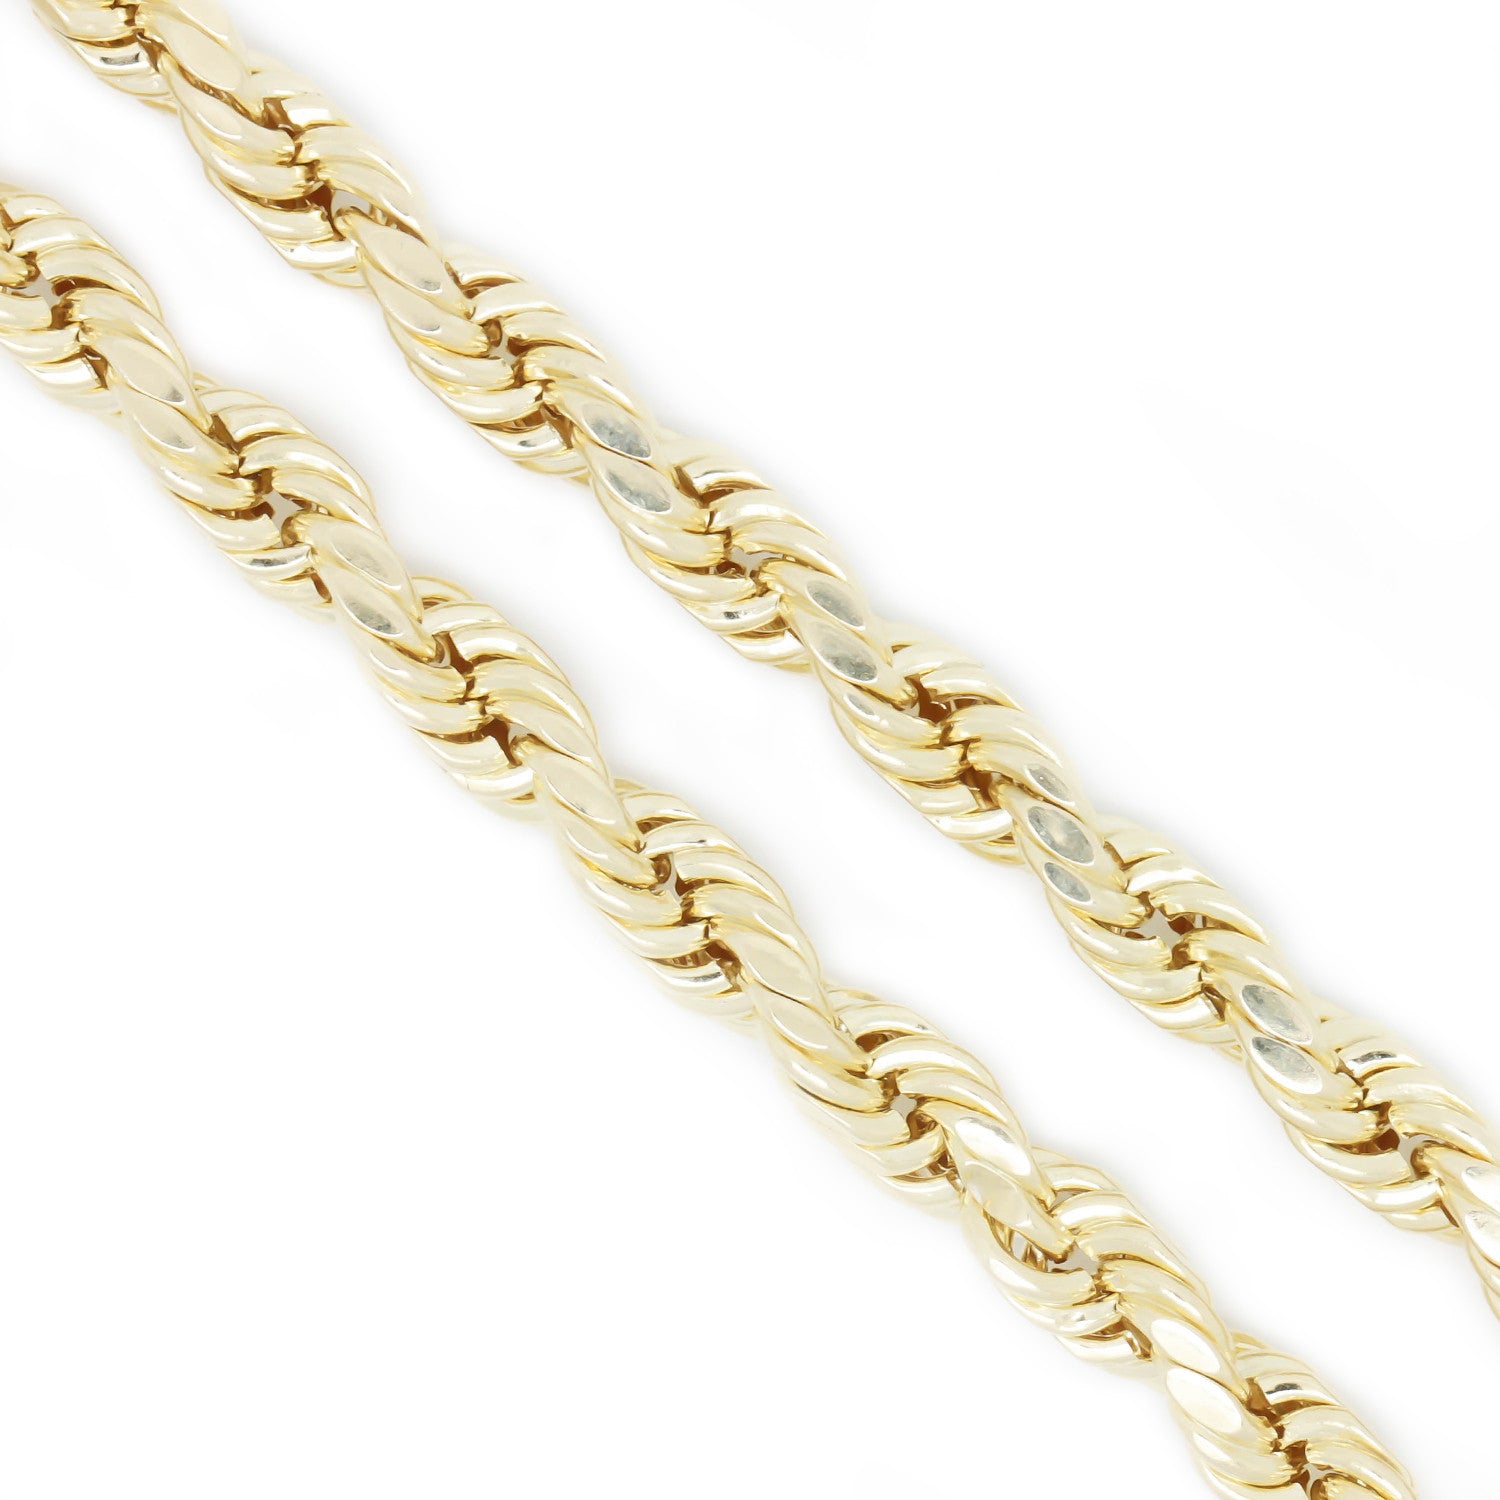 10K Yellow Gold 2.5 mm Rope Chain Necklace 22 Inches